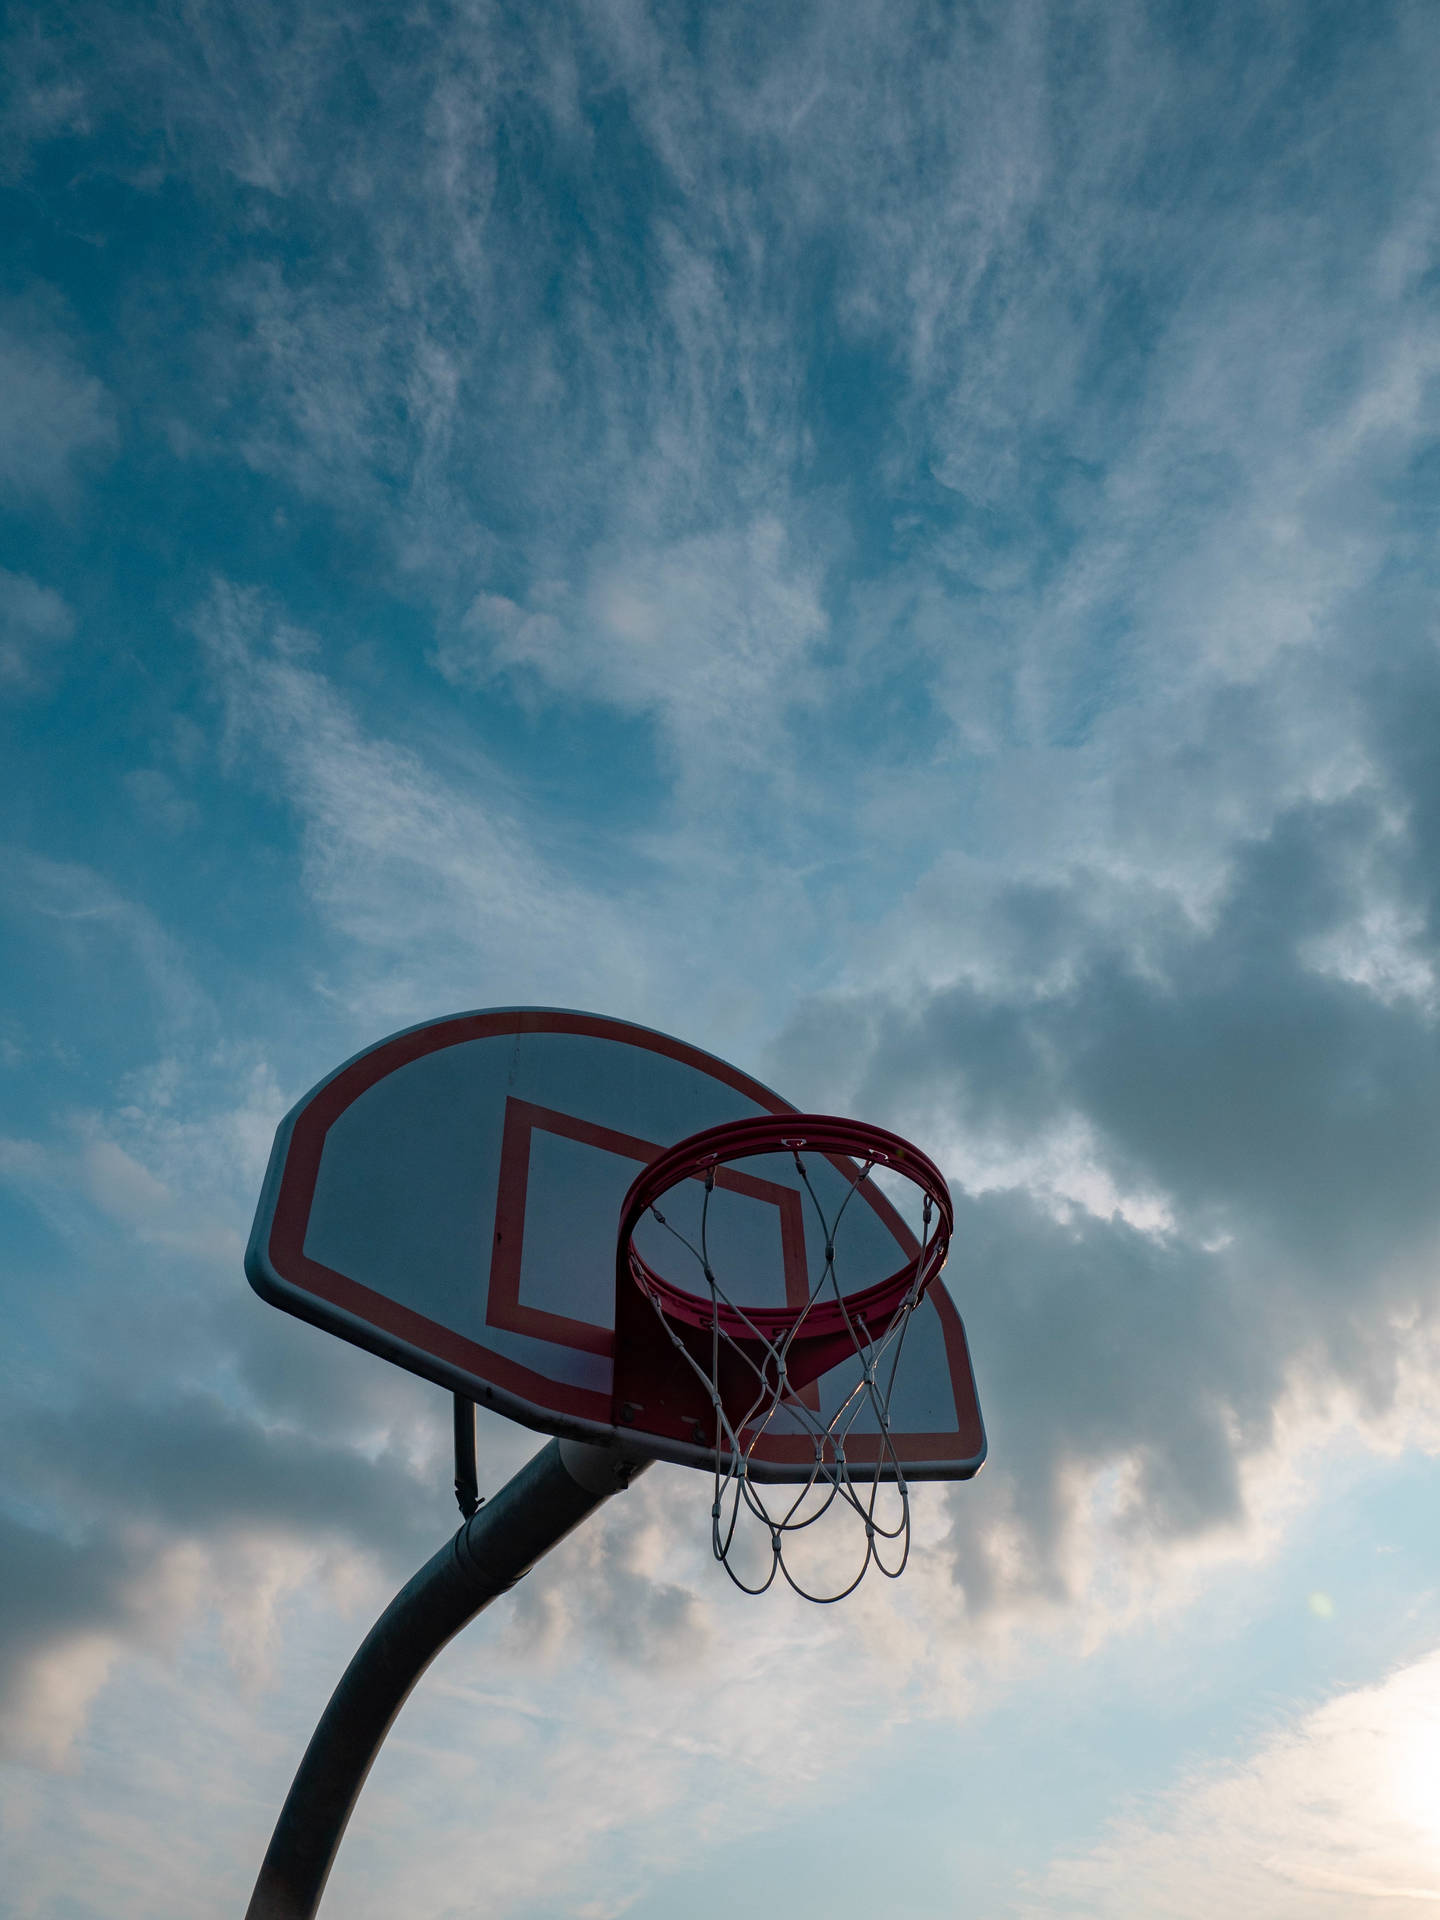 3888X5184 Basketball Wallpaper and Background